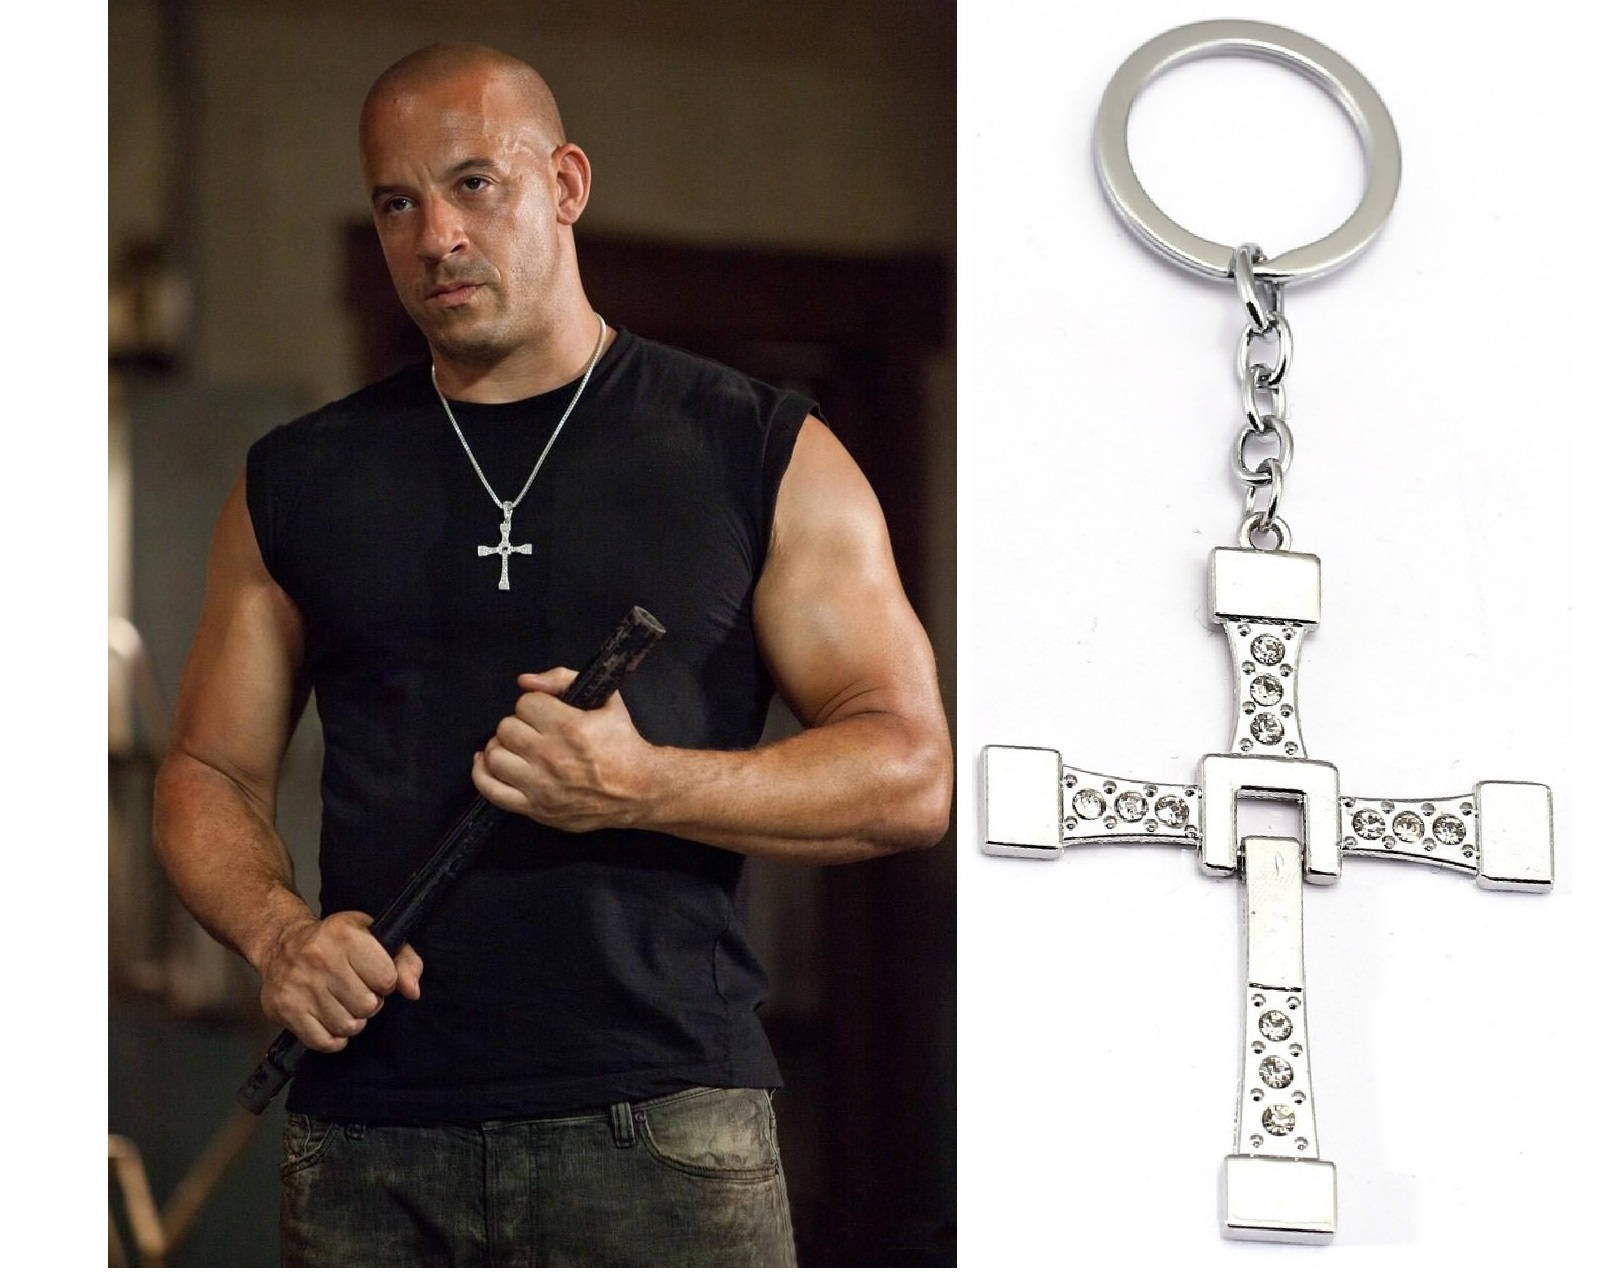 dominic toretto 2 fast and the furious katiejays key ring